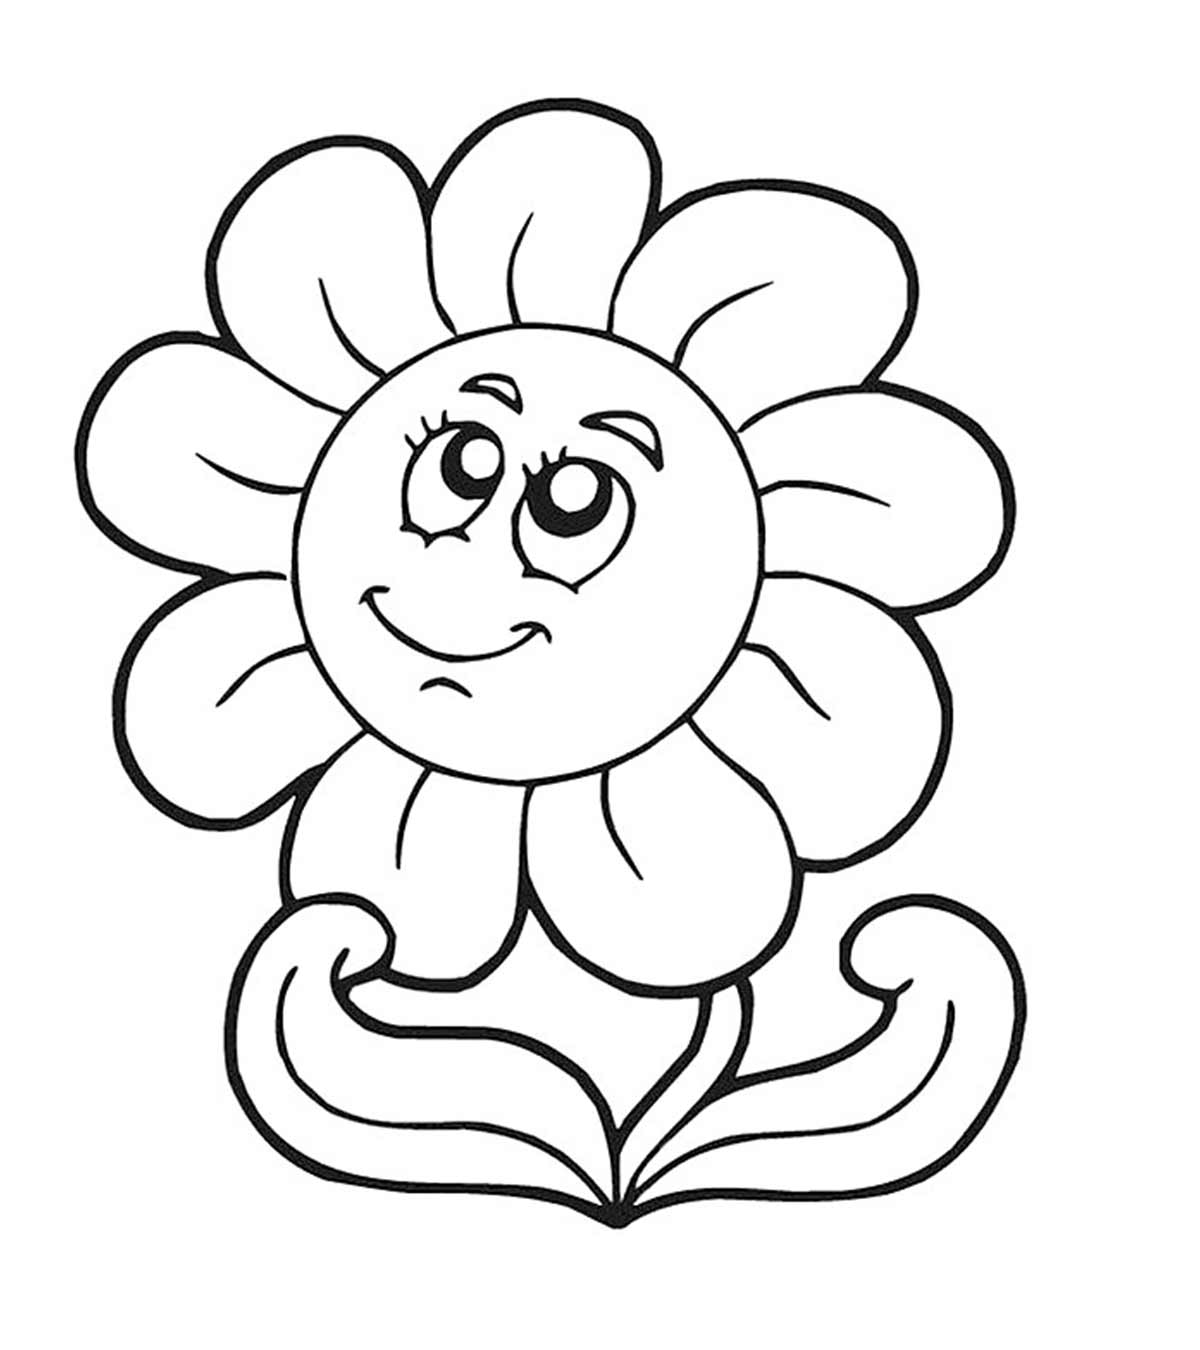 Beautiful sunflower coloring pages for your little girl